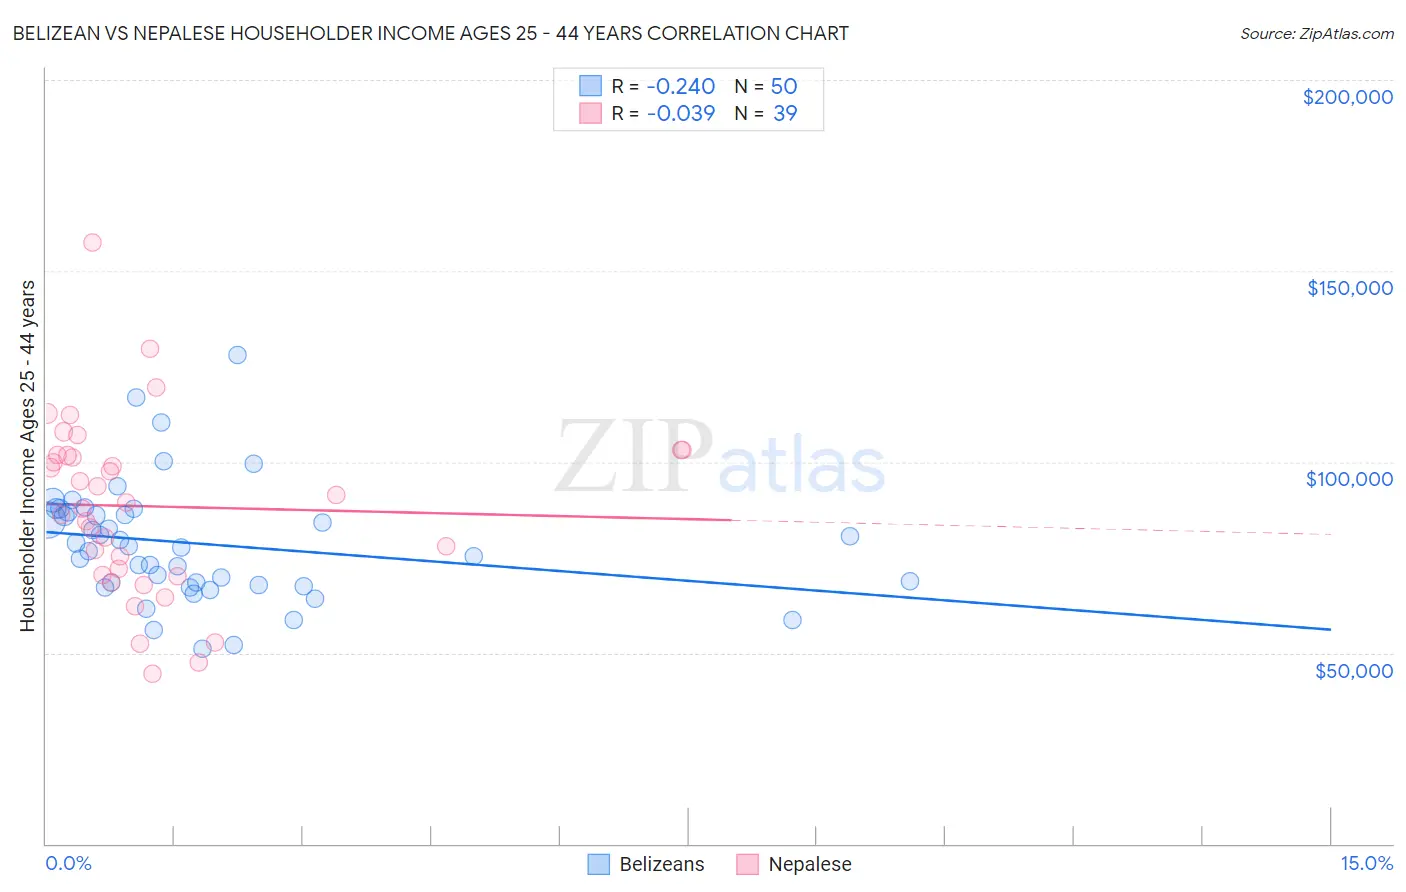 Belizean vs Nepalese Householder Income Ages 25 - 44 years